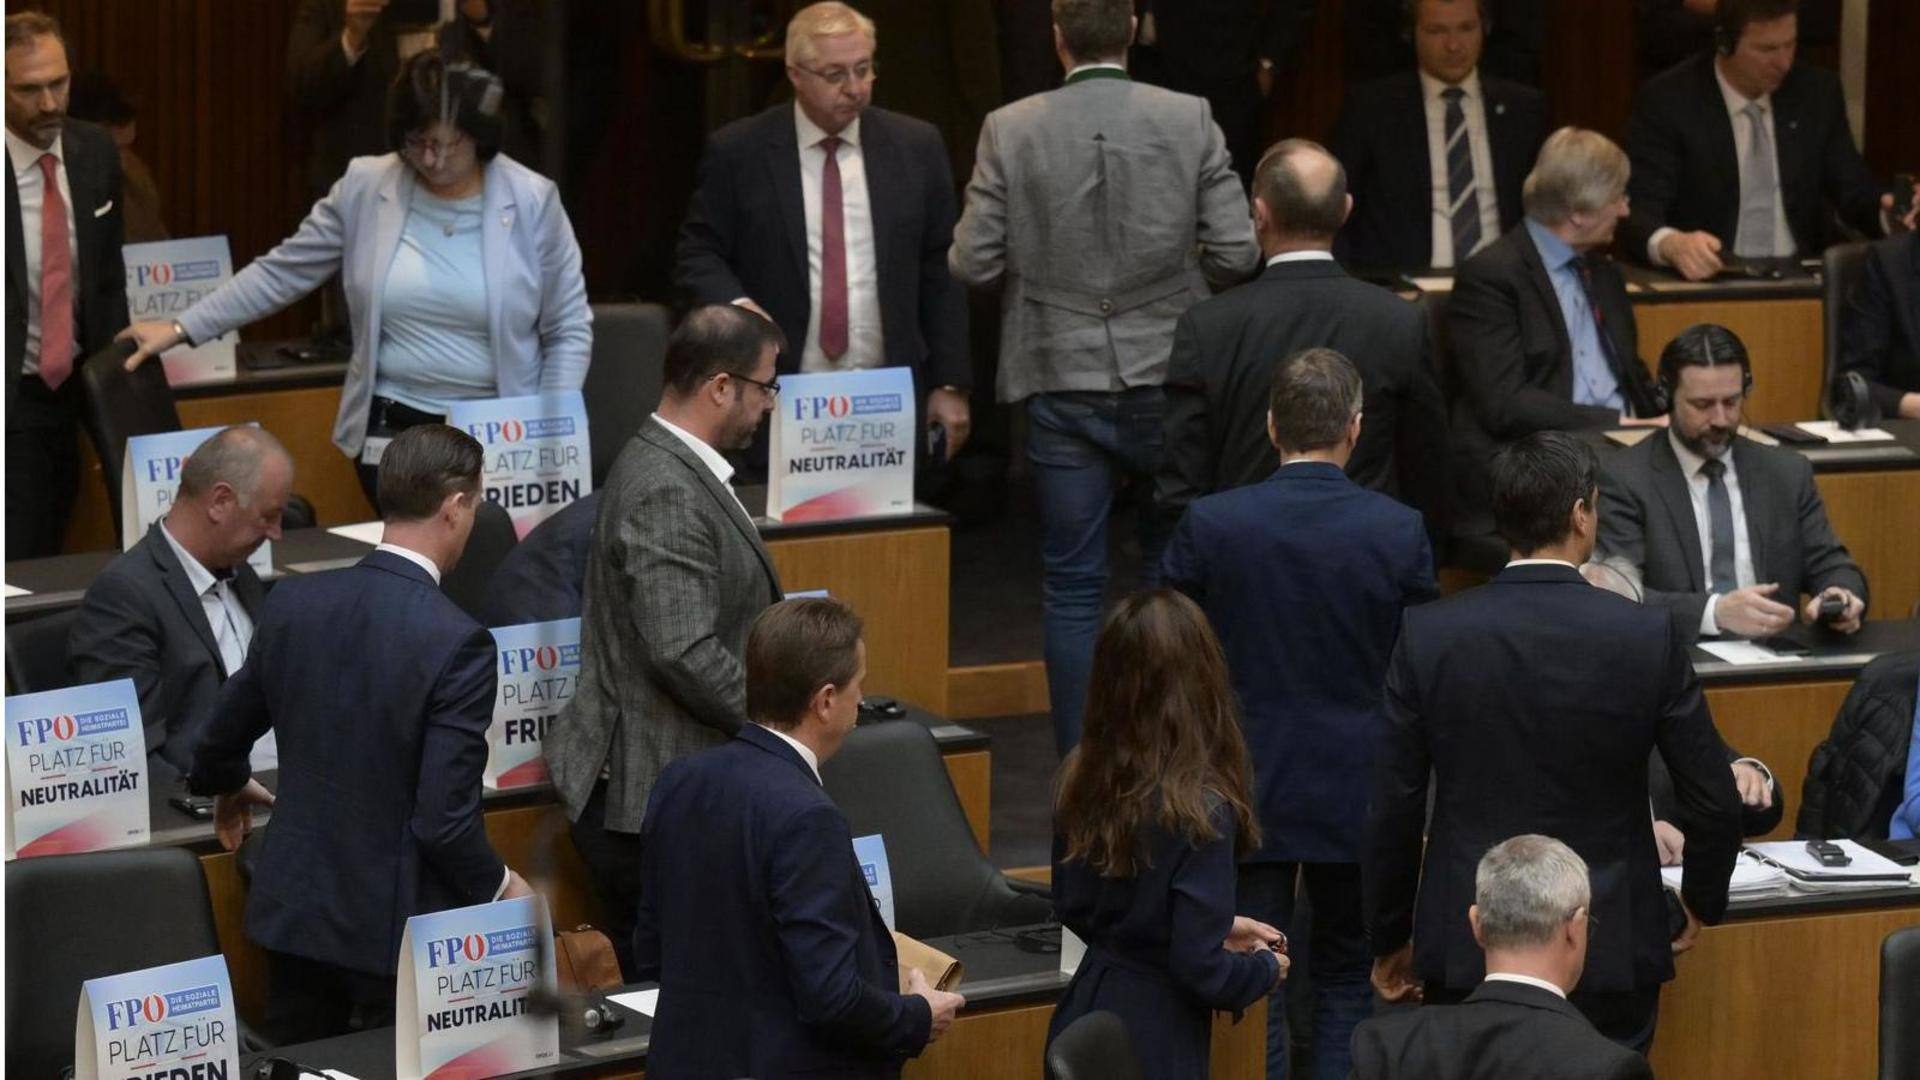 Austria: Over 20 far-right MPs leave Parliament during Zelenskyy's speech